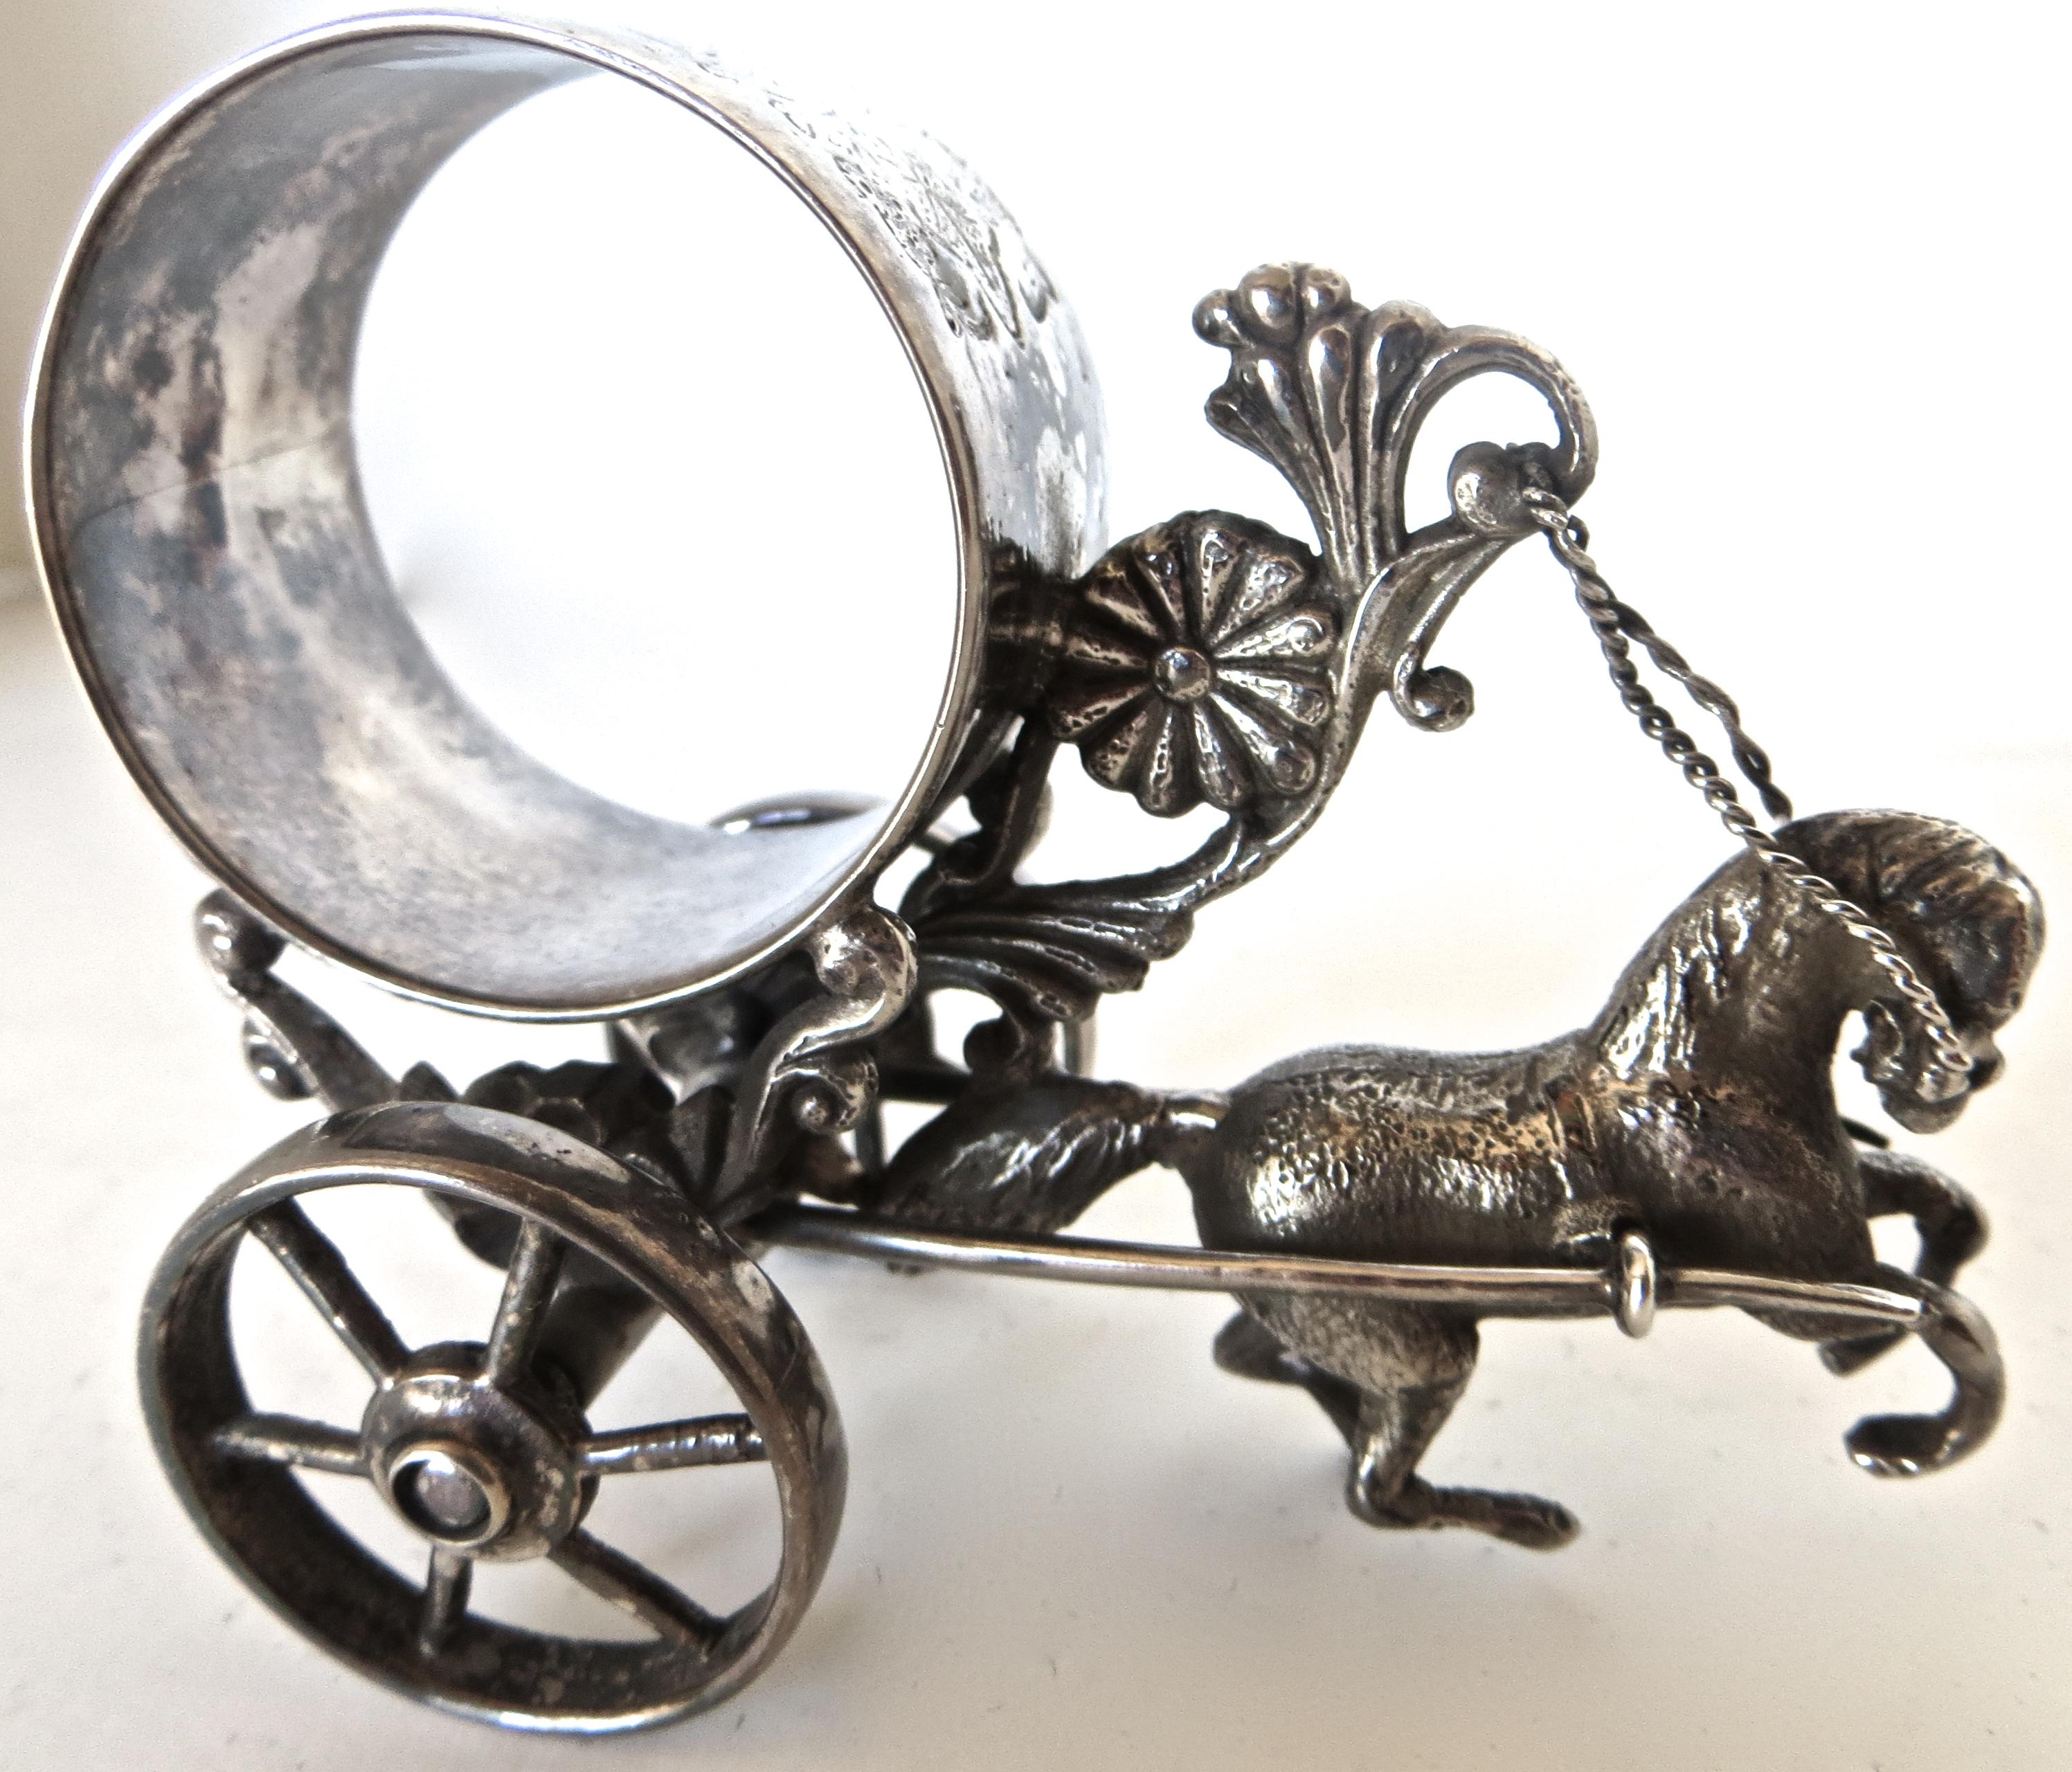 Late 19th Century Horse Drawn Silver Plated Figural Napkin Ring on Wheels. American, circa 1885